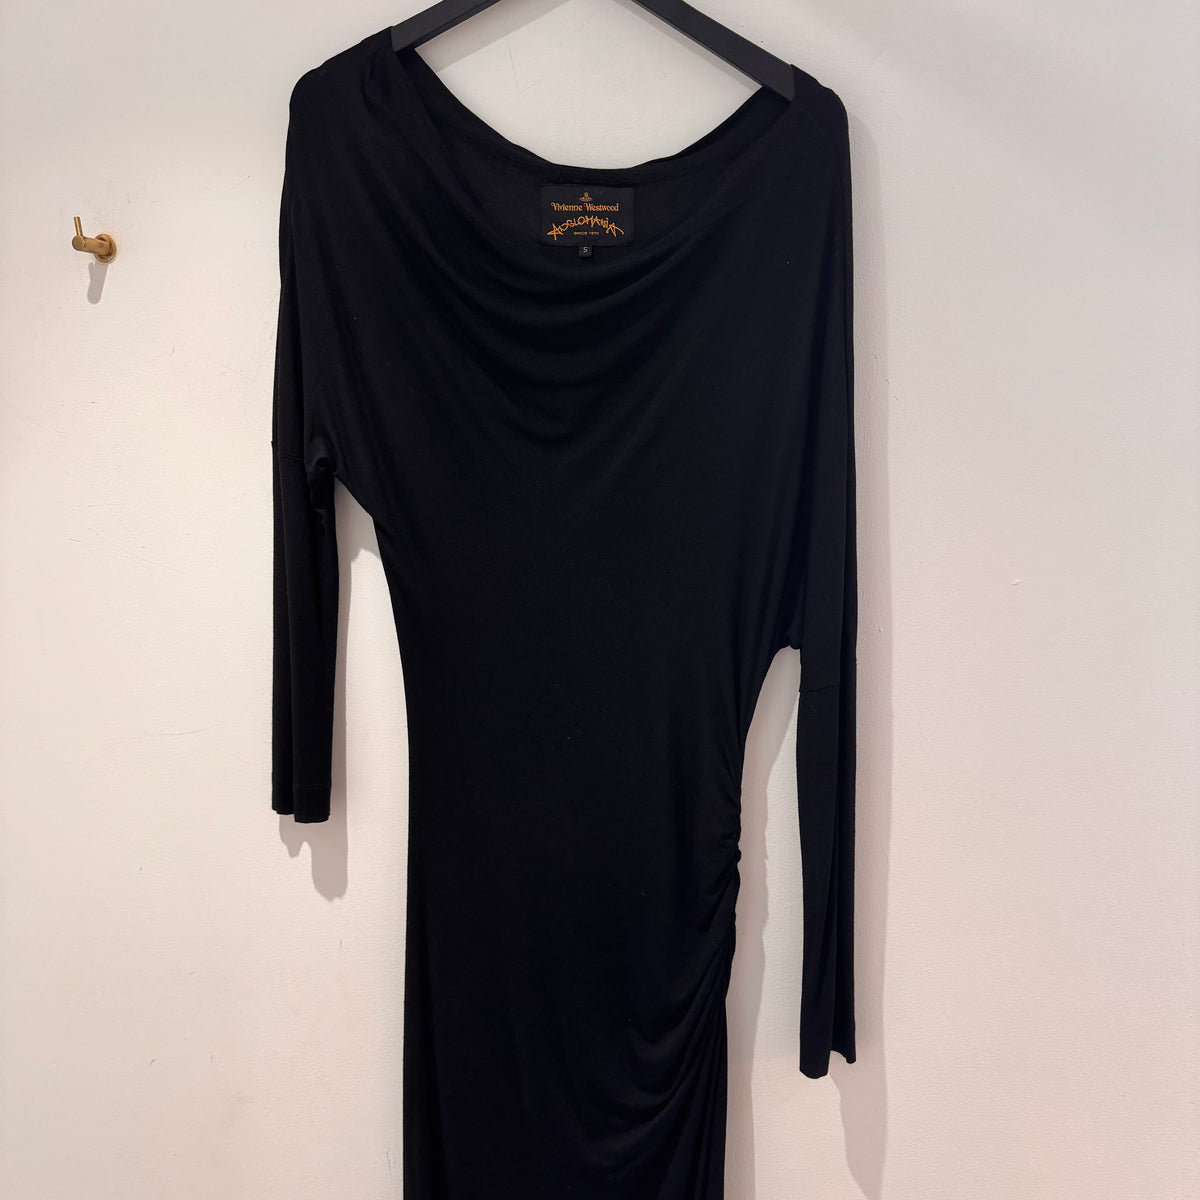 Vivienne Westwood Anglomania Dress Black Size Small